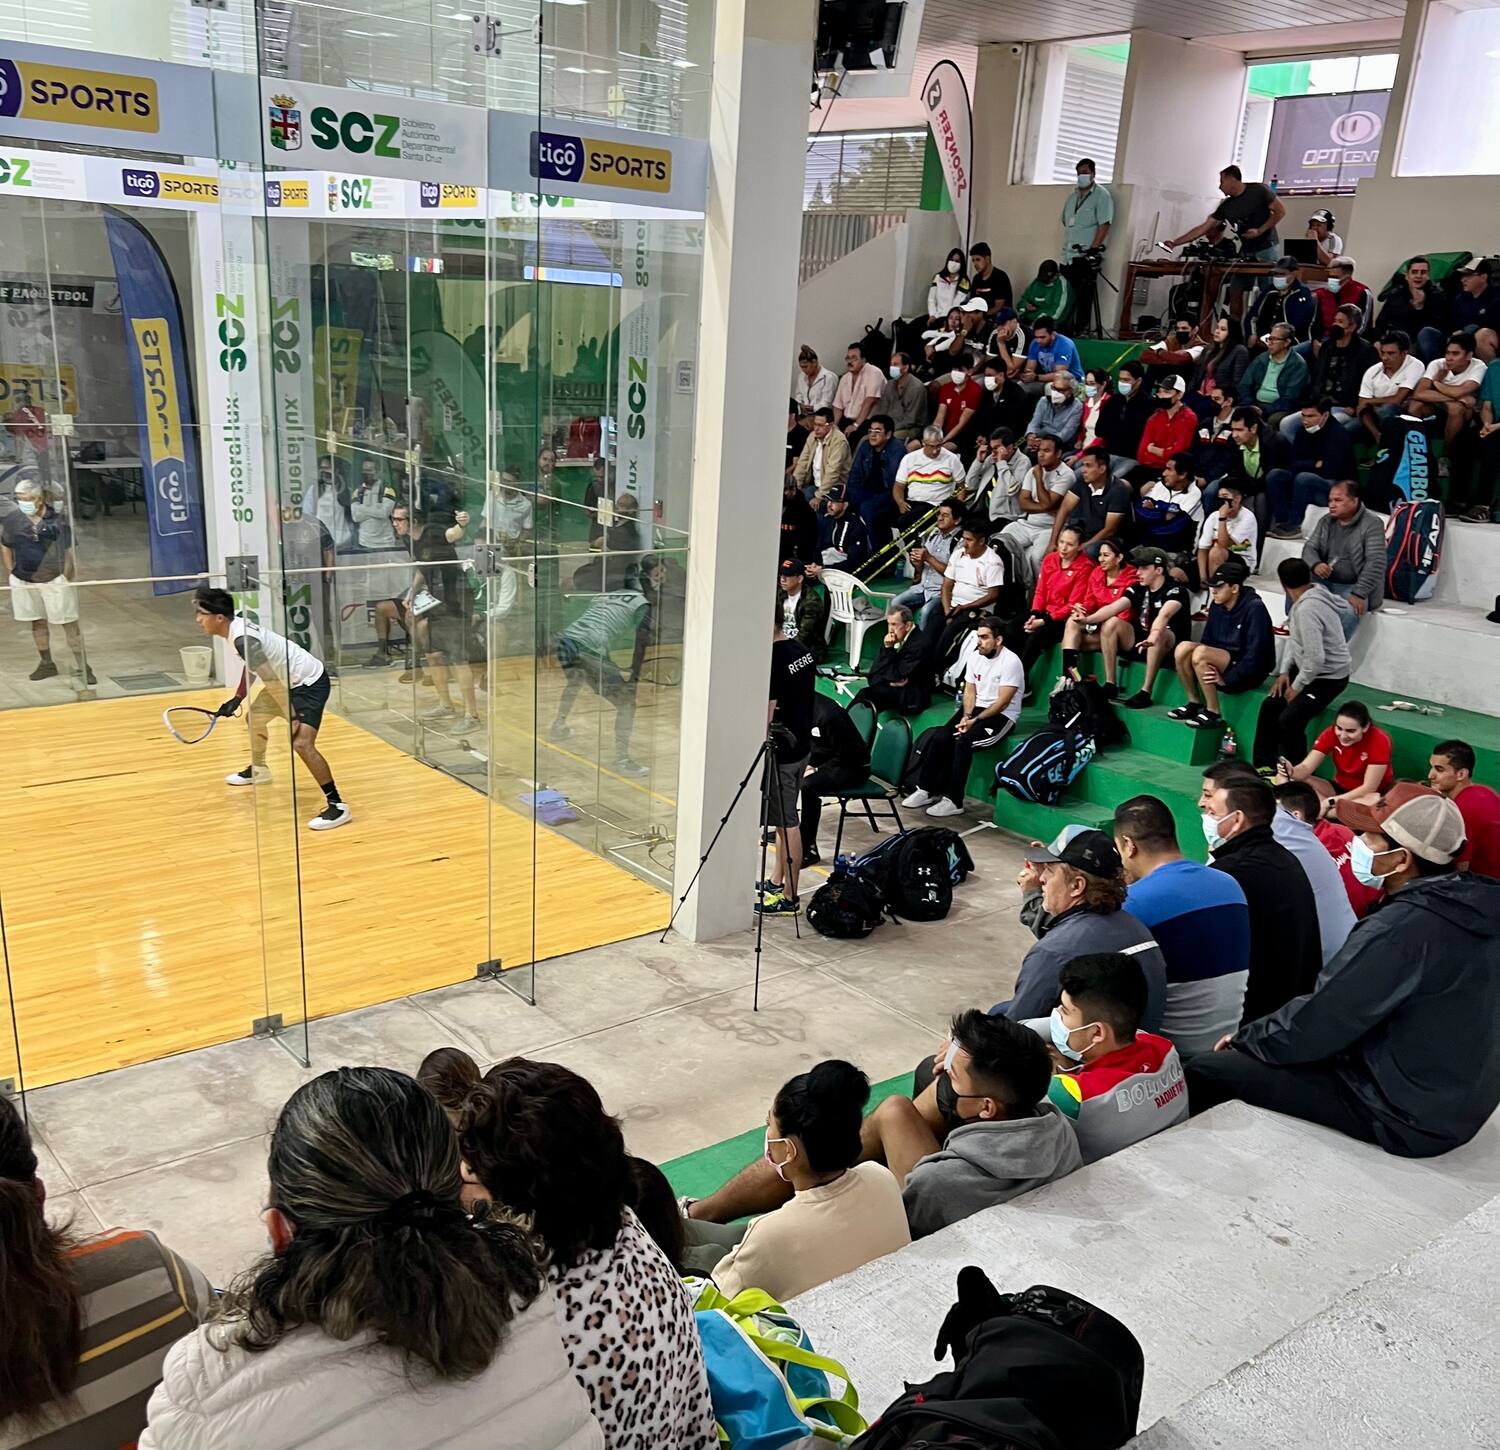 Packed house at the XXXIII Pan American Championships